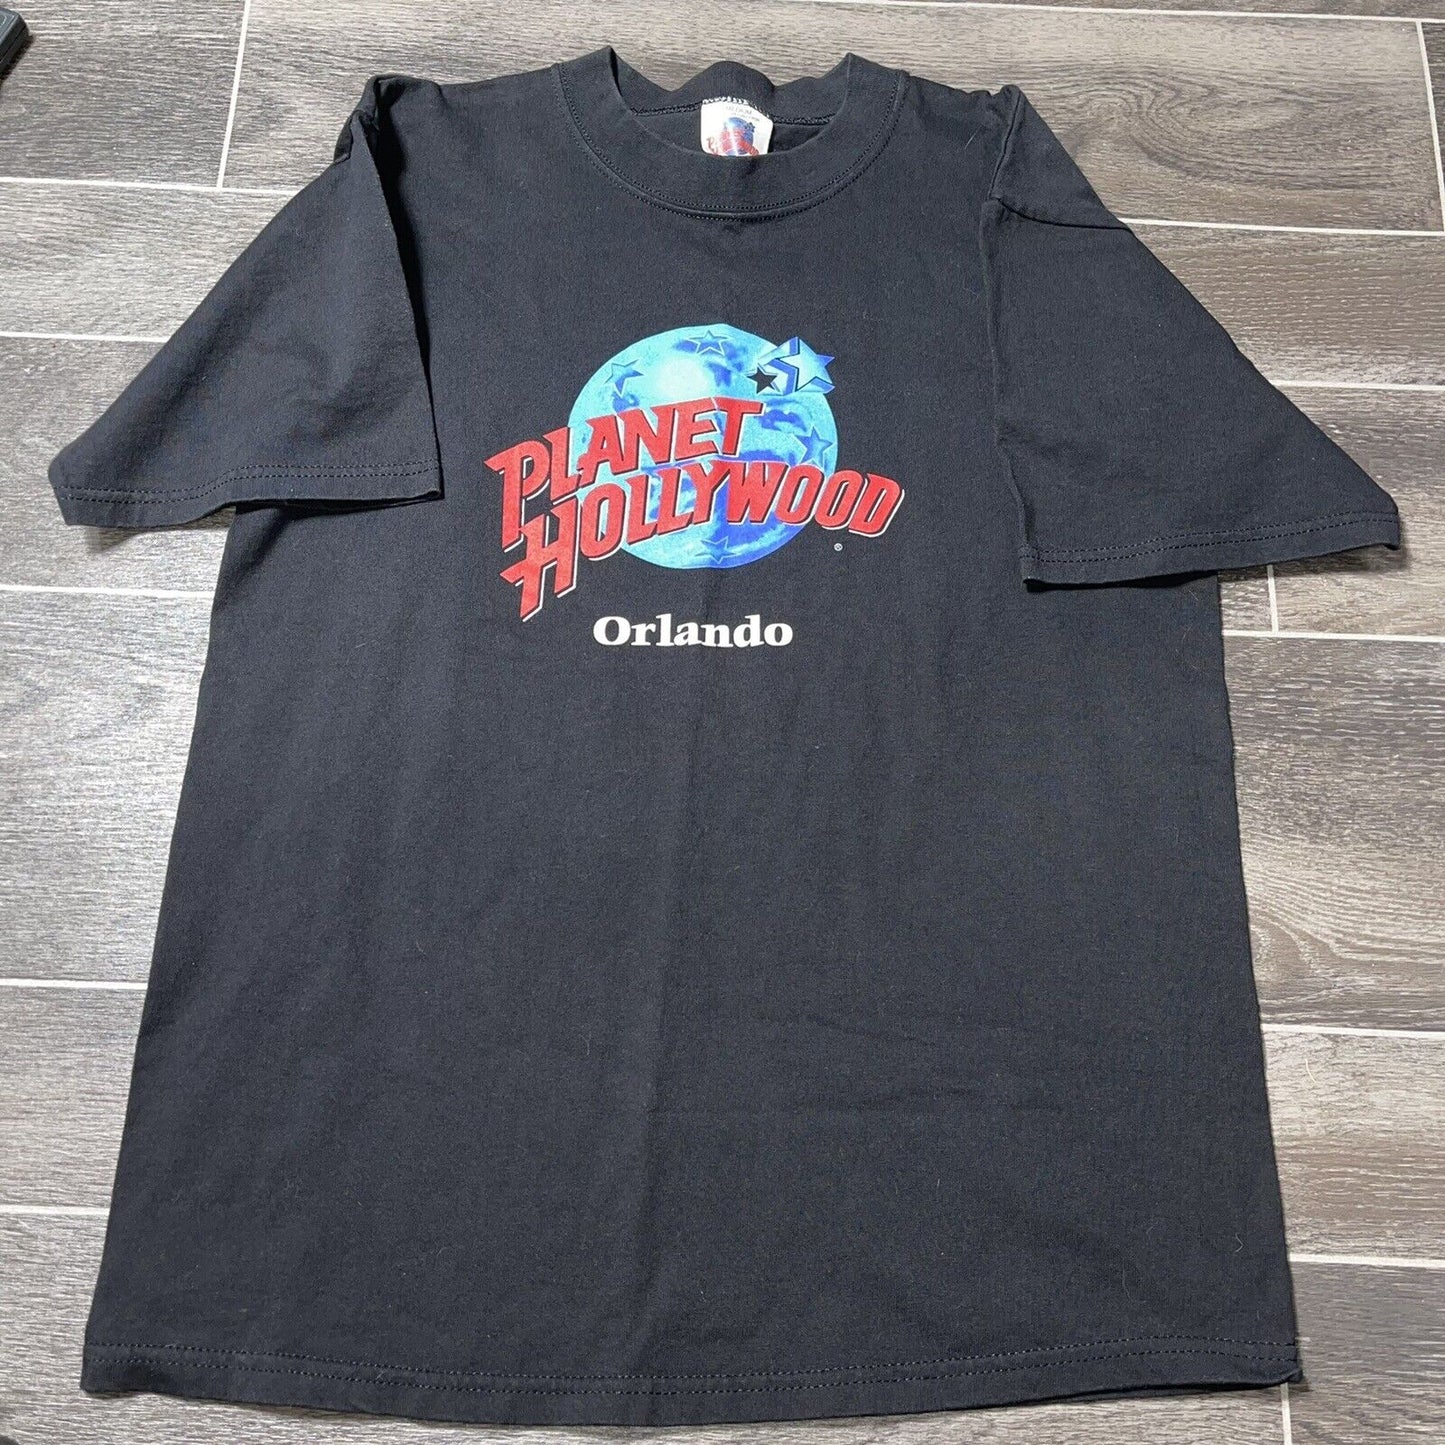 Vintage 90s Planet Hollywood Orlando Graphic T Shirt Size Large